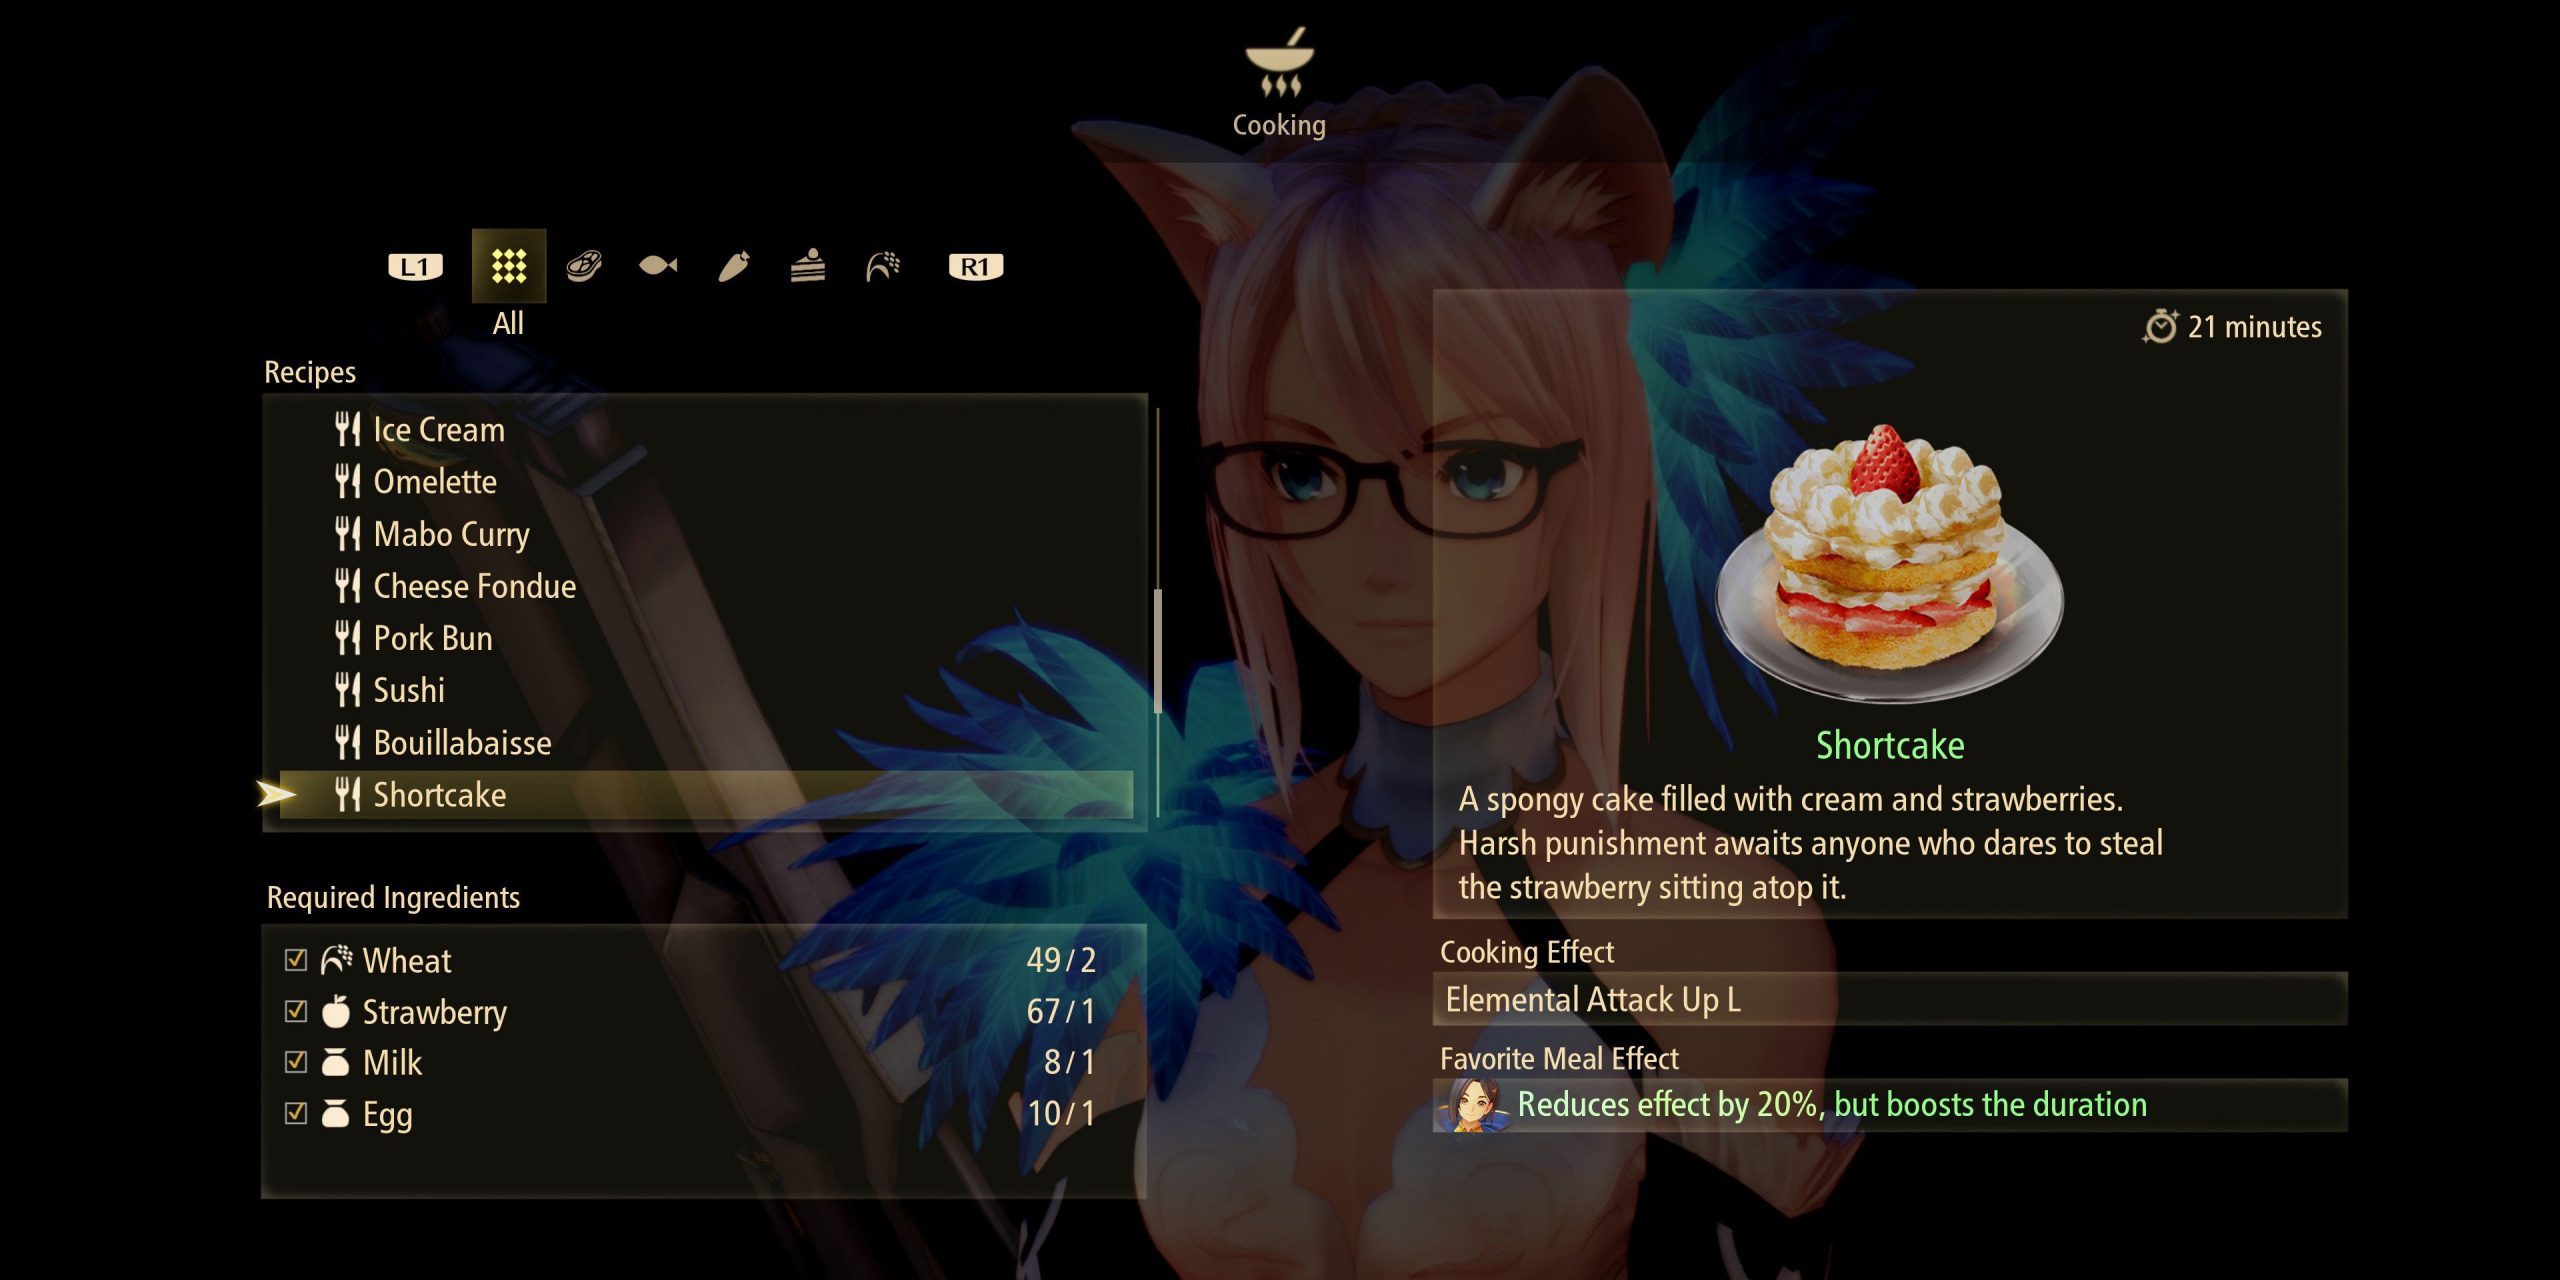 tales-of-arise-cooking-recipes-27-shortcake-2707721